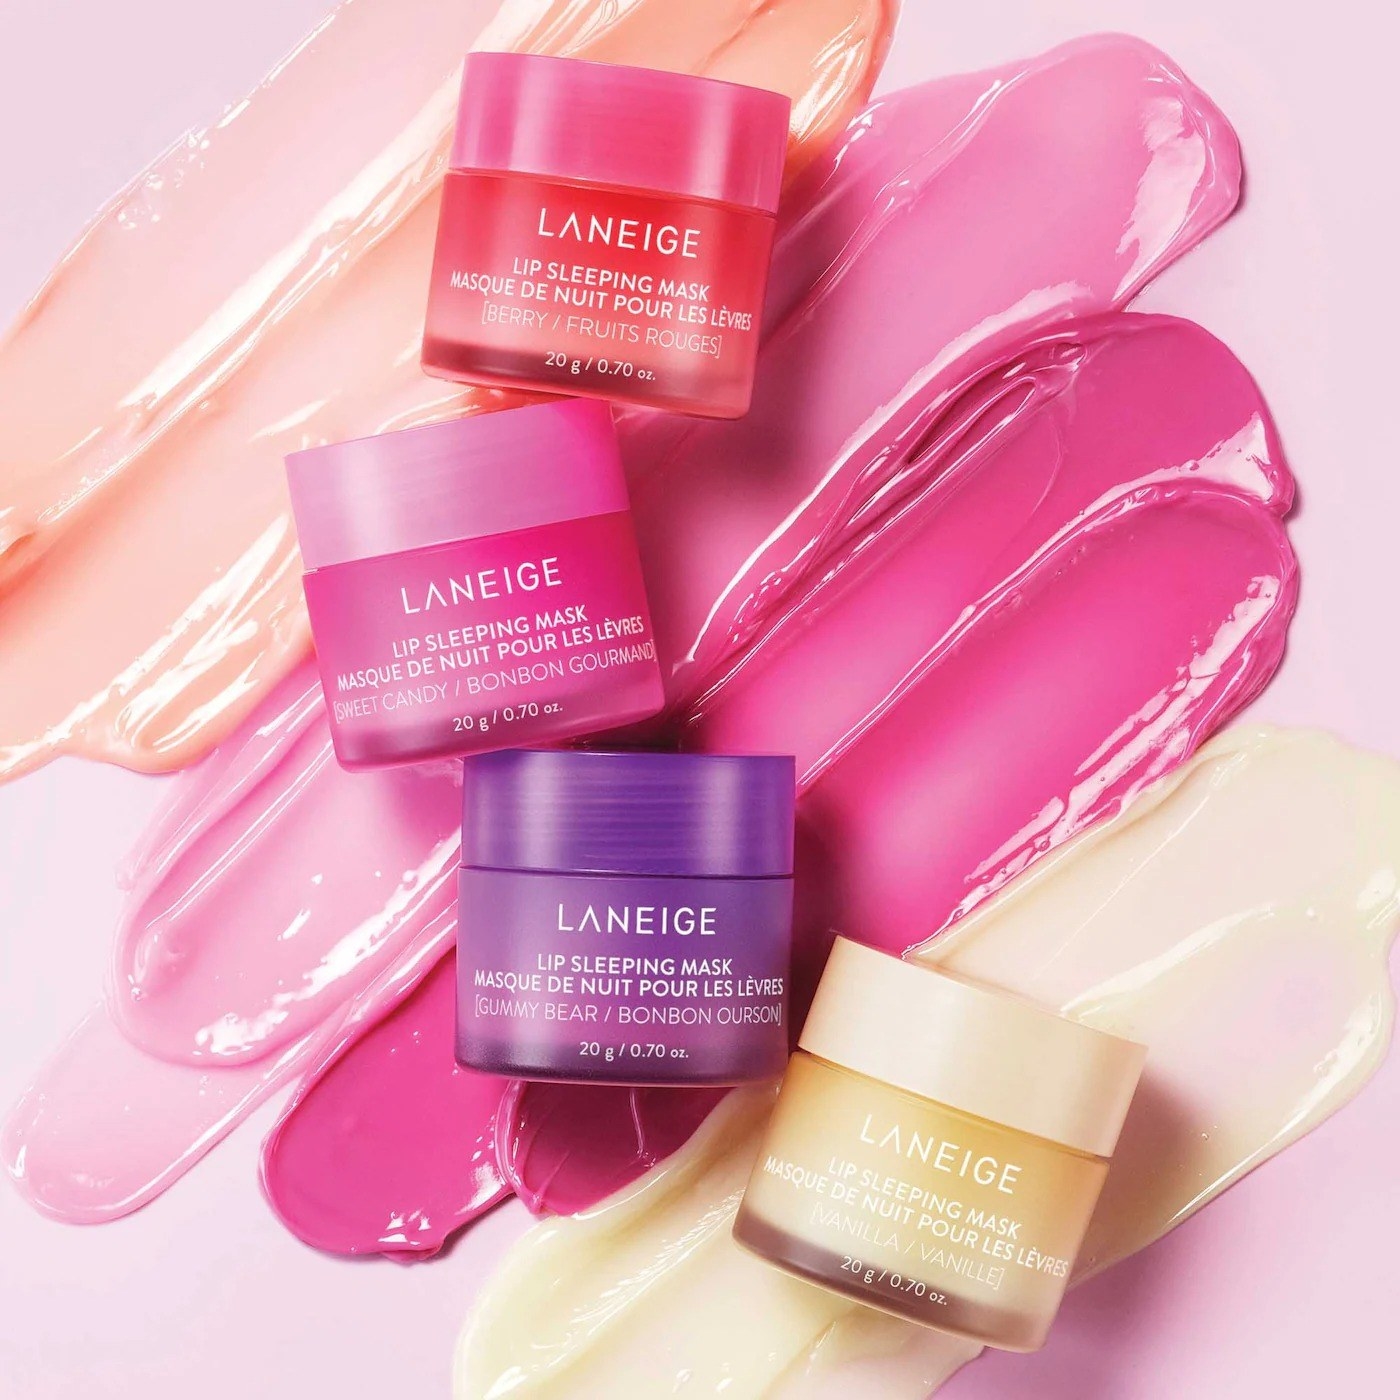 Four flavors of the Laneige Lip Sleeping Mask